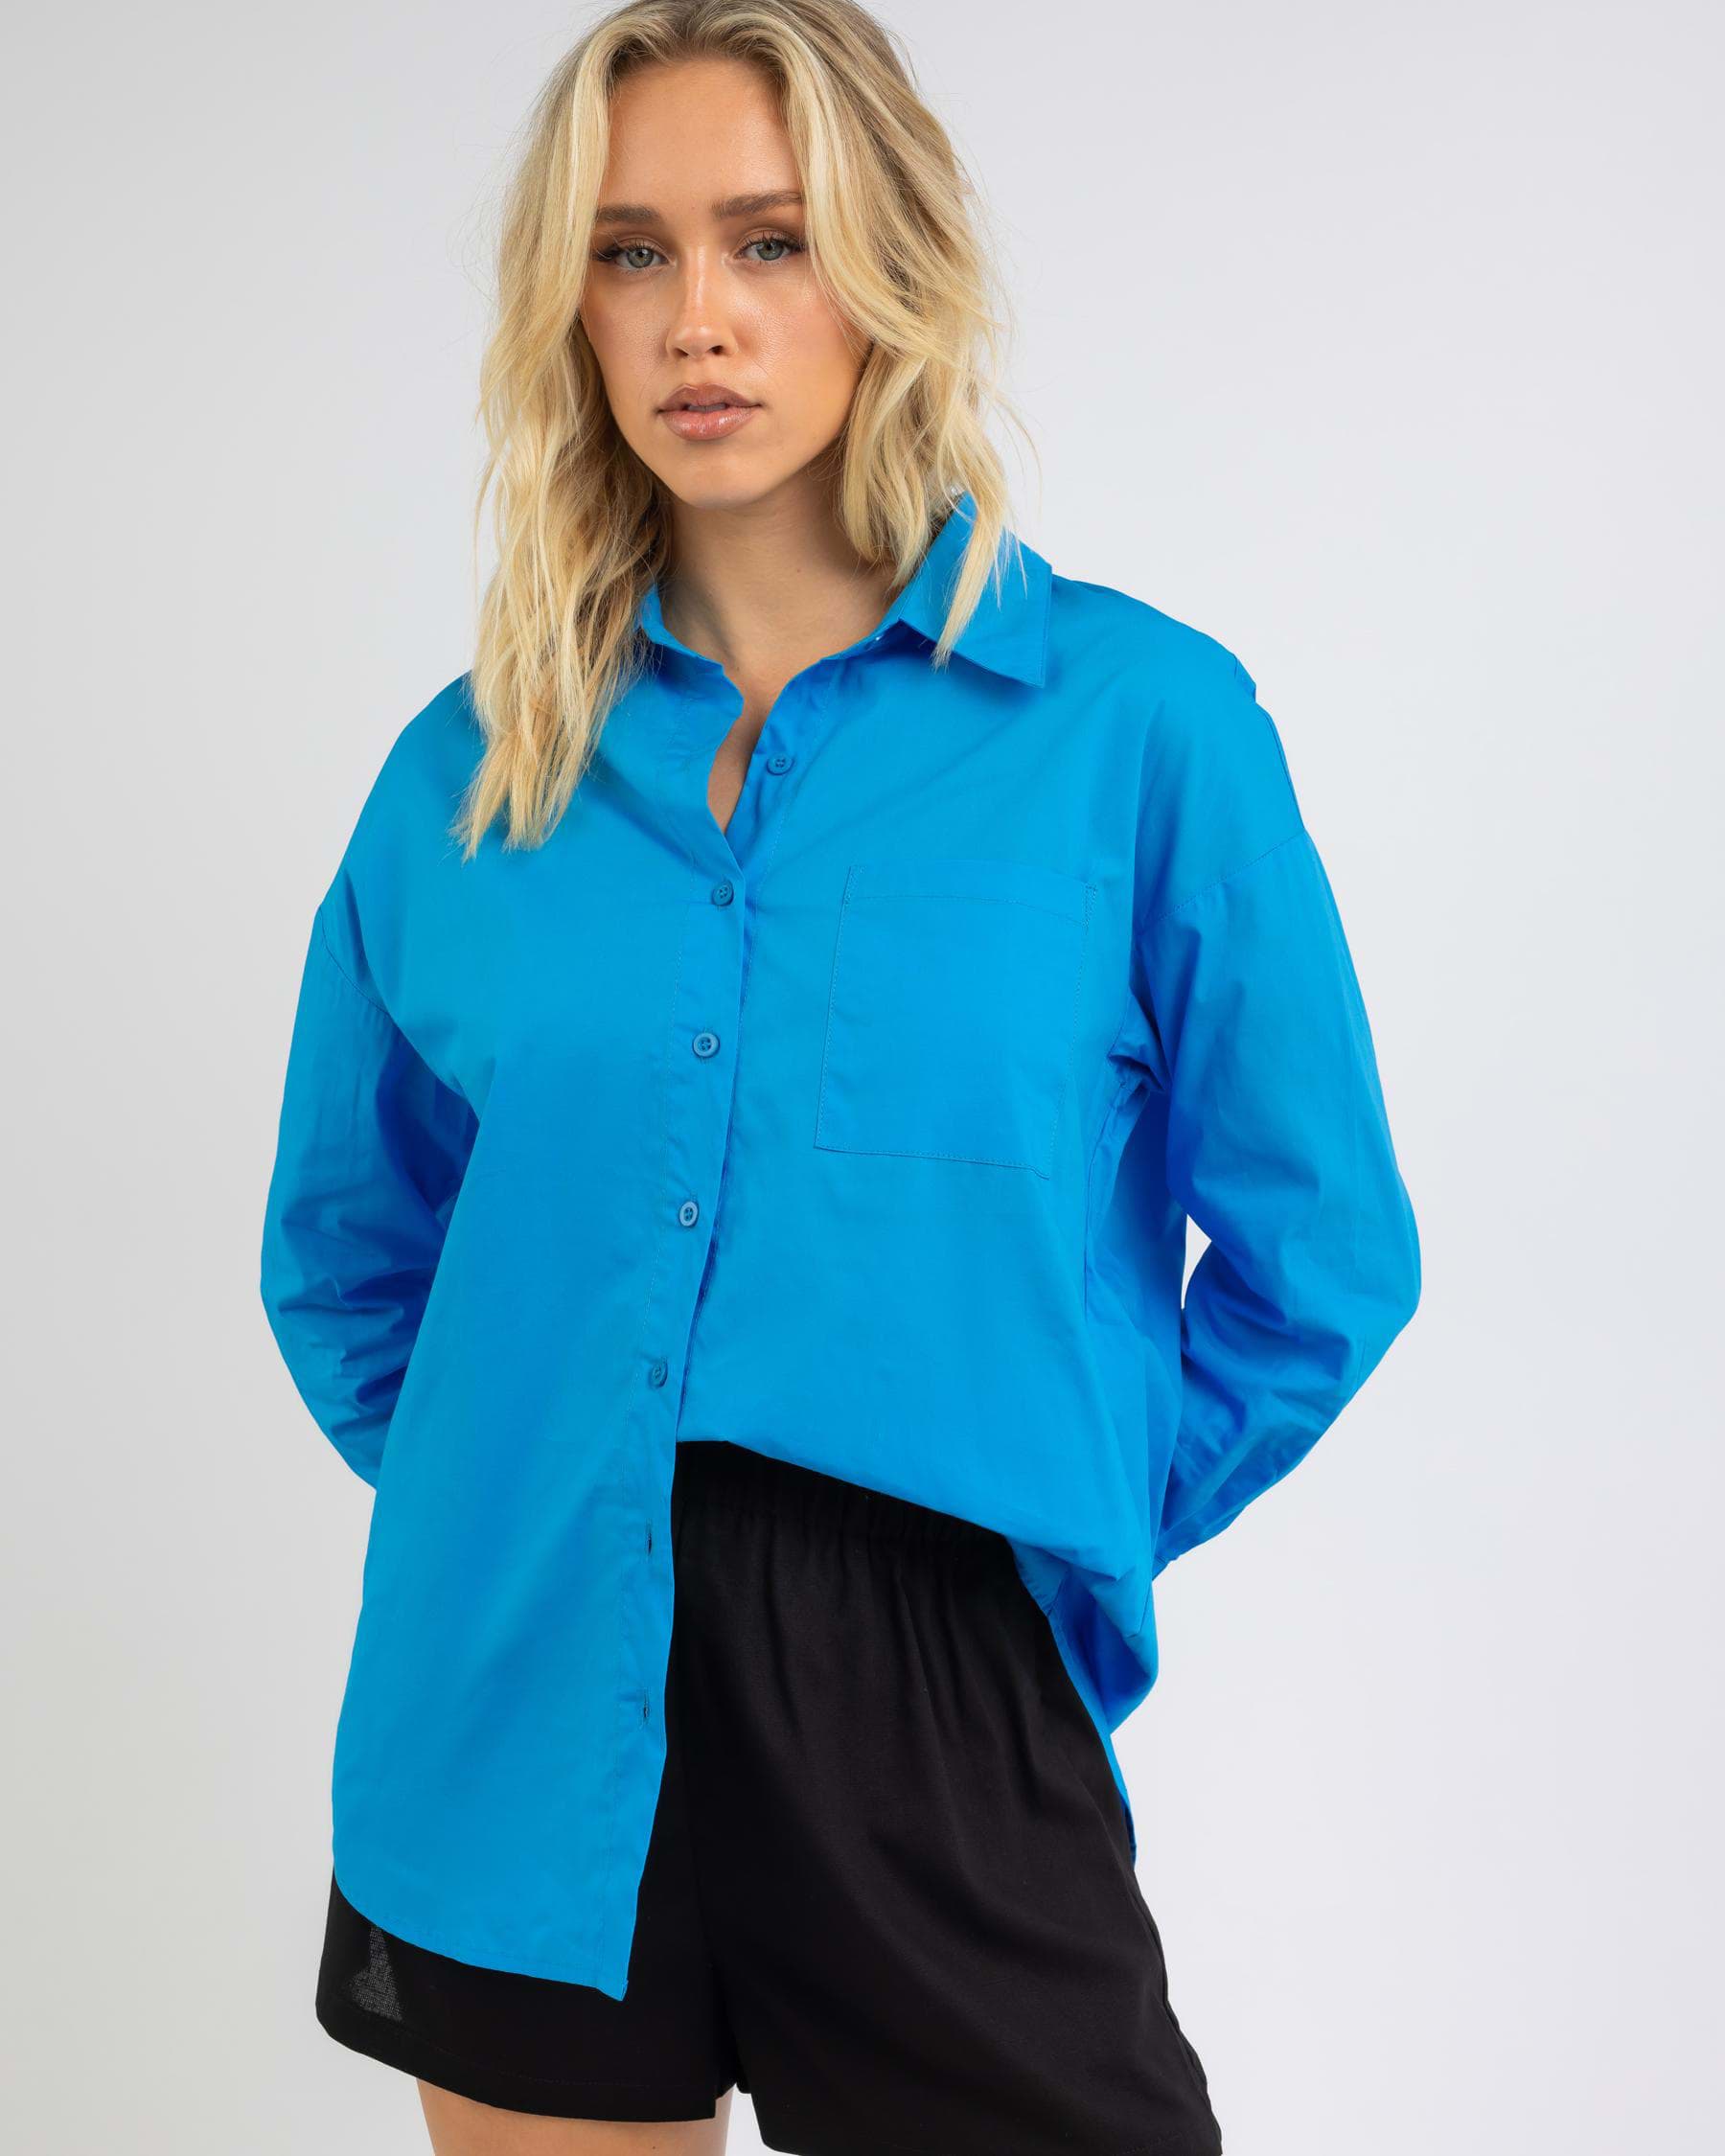 Ava And Ever Material Girl Shirt In Blue - Fast Shipping & Easy Returns ...